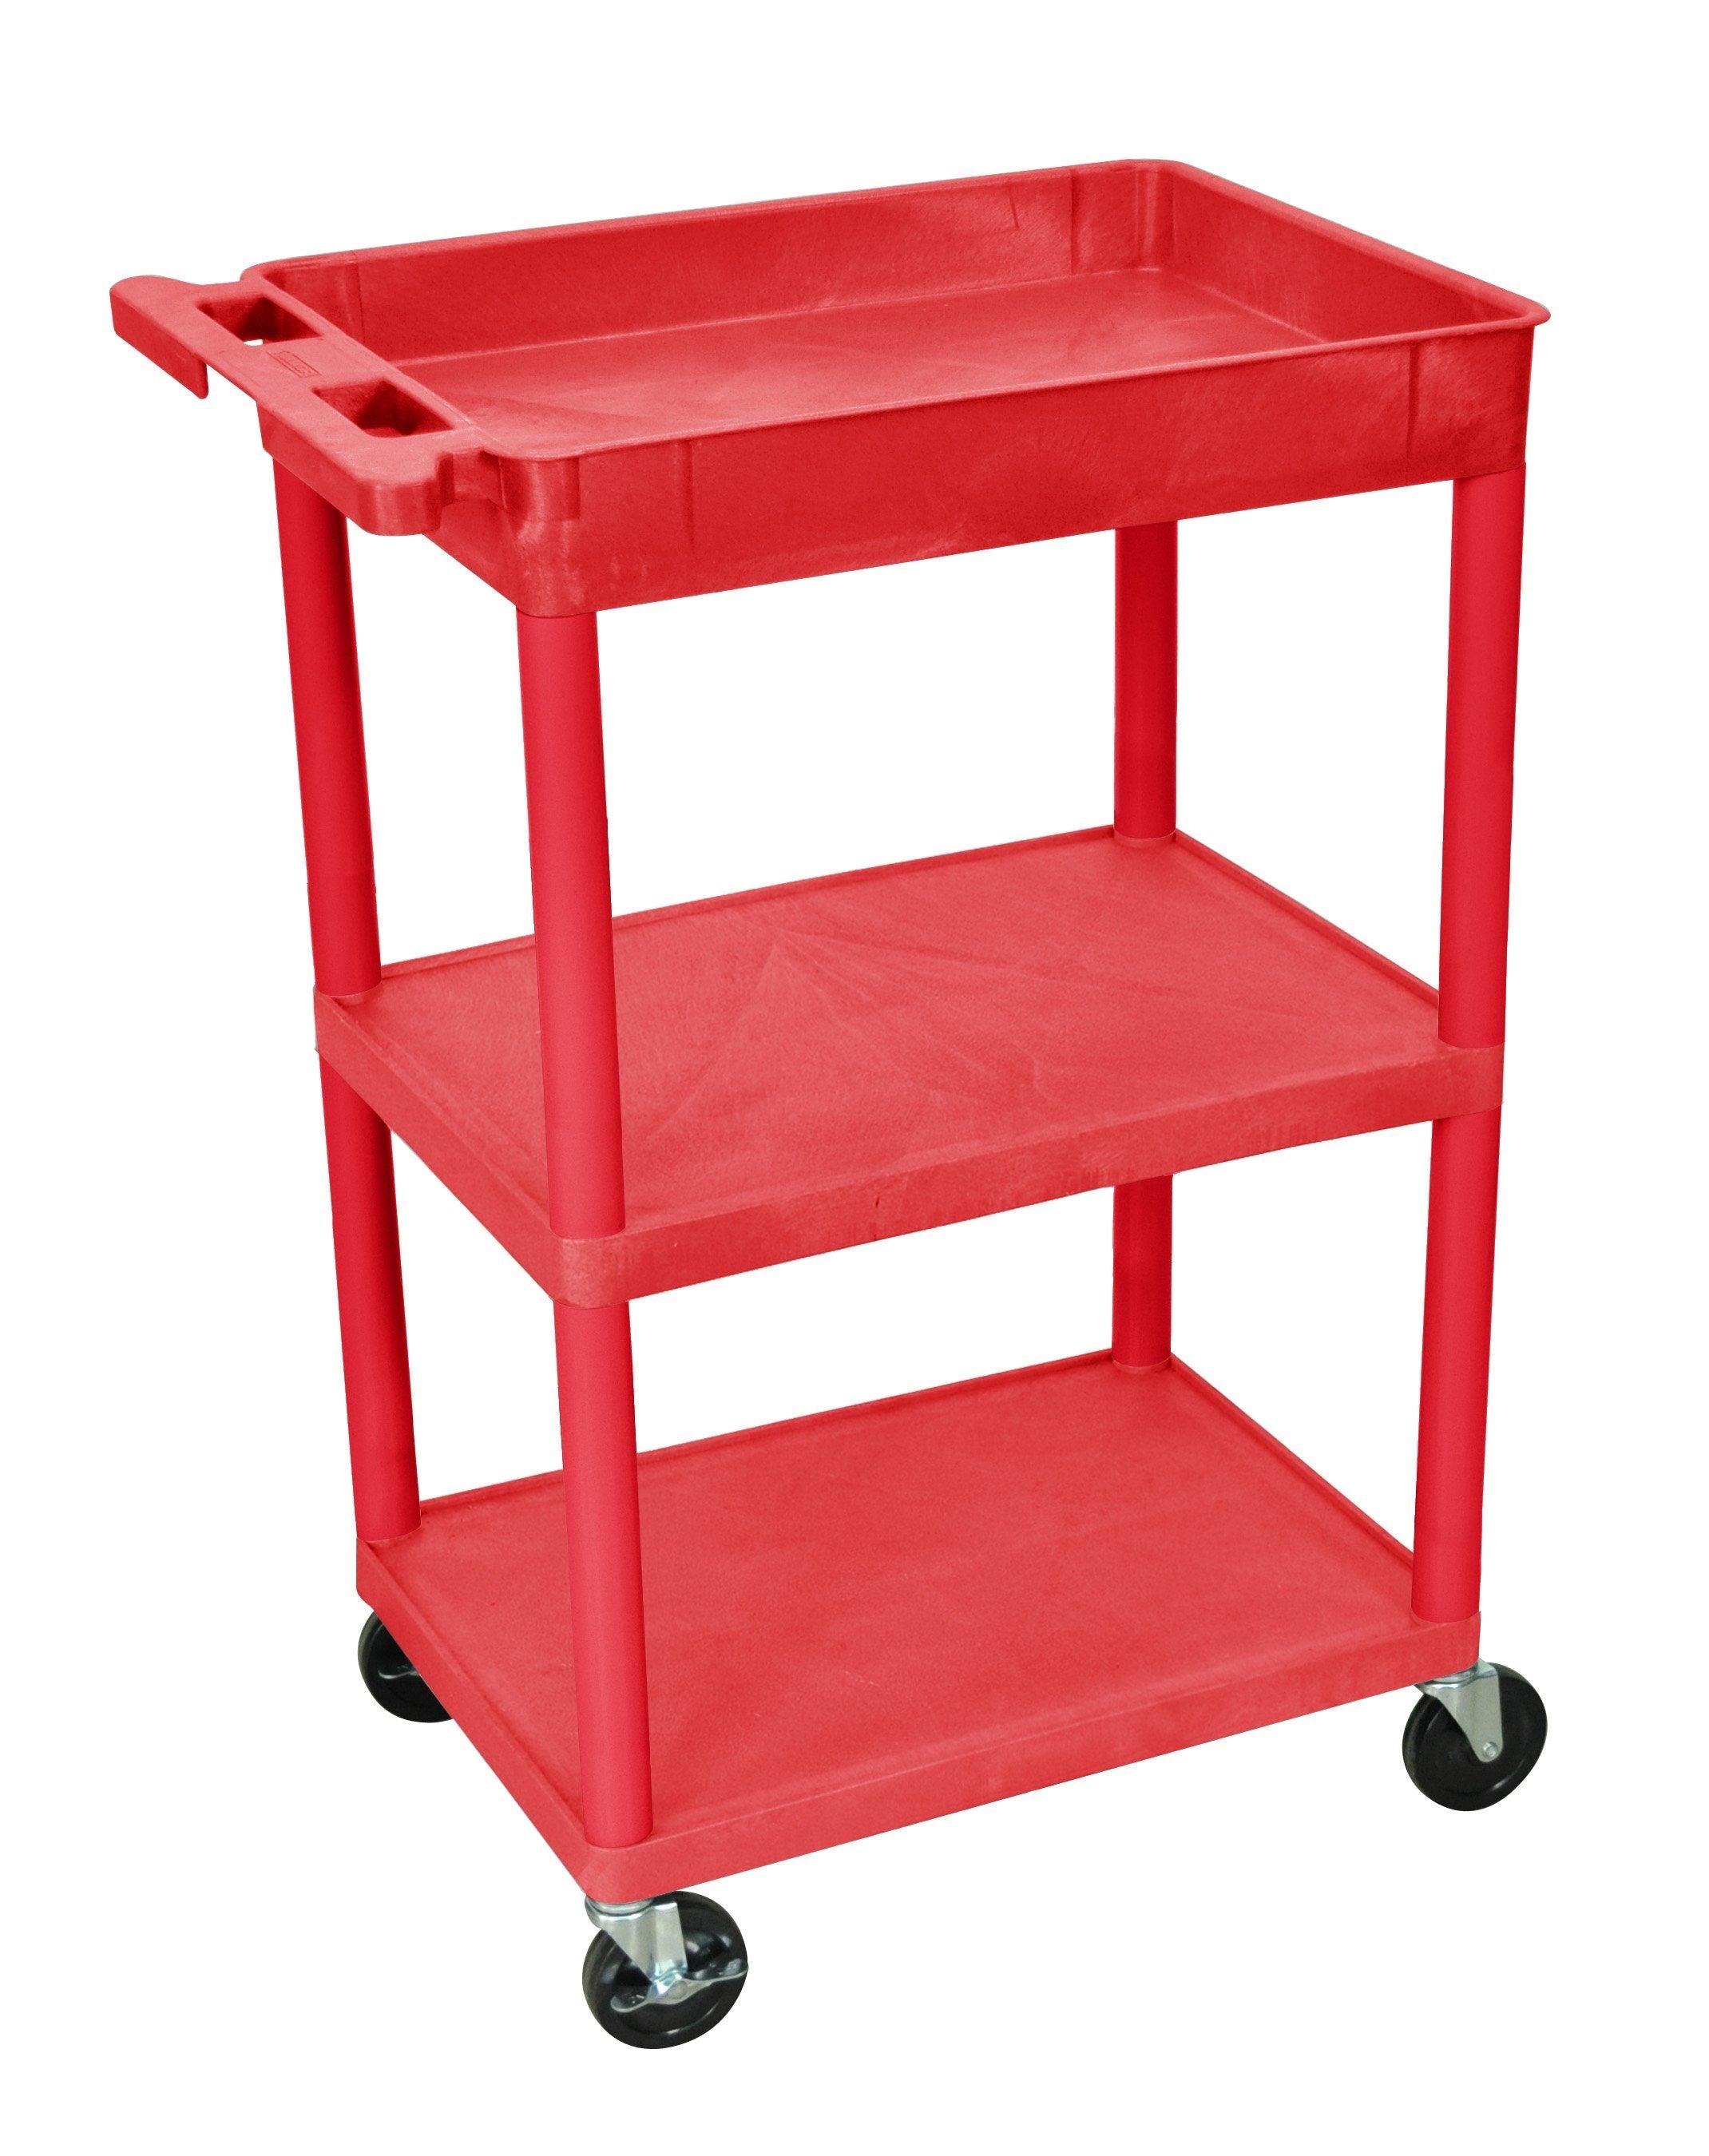 Luxor Tub Cart Red 1 Tub And 2 Flat Shelves